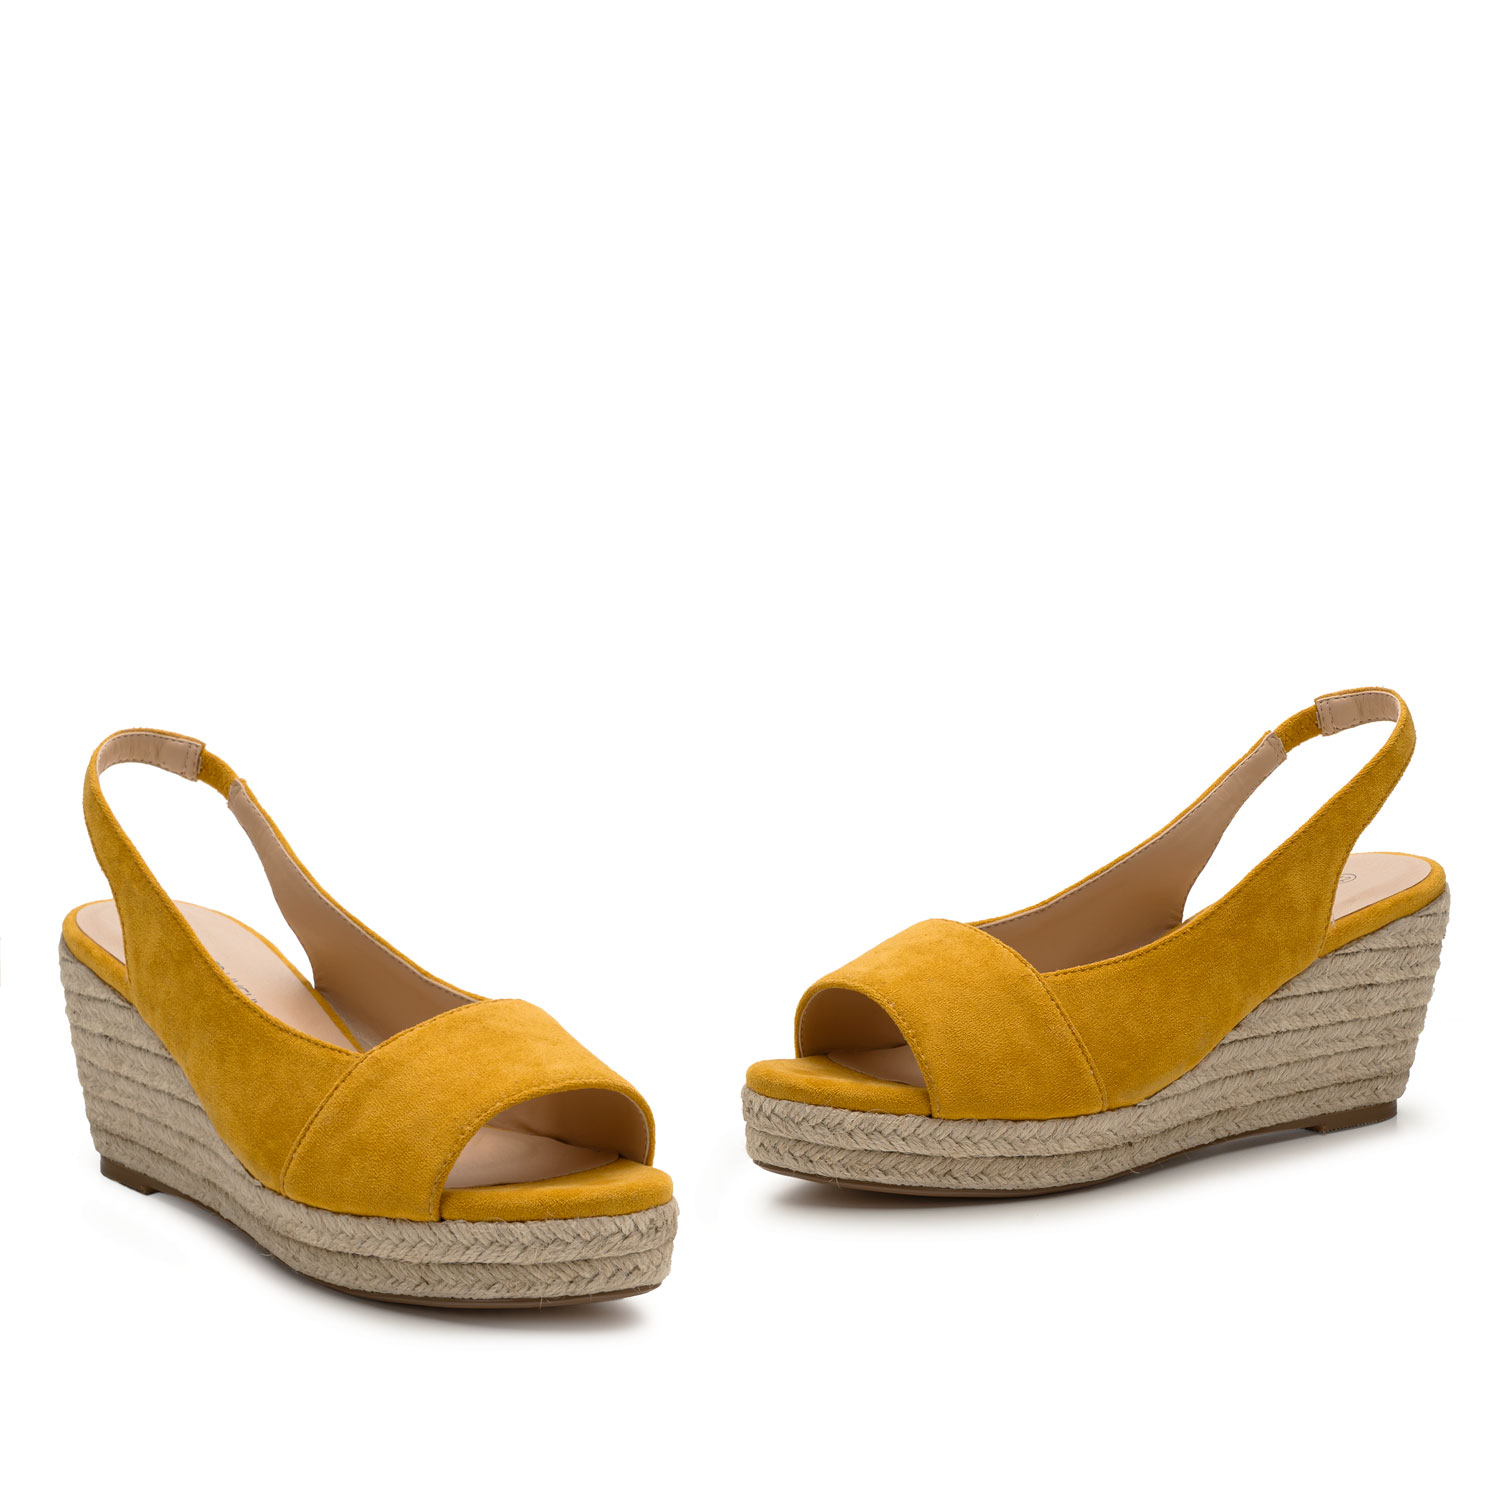 Mustard Faux Suede Espadrilles with Jute Wedge 